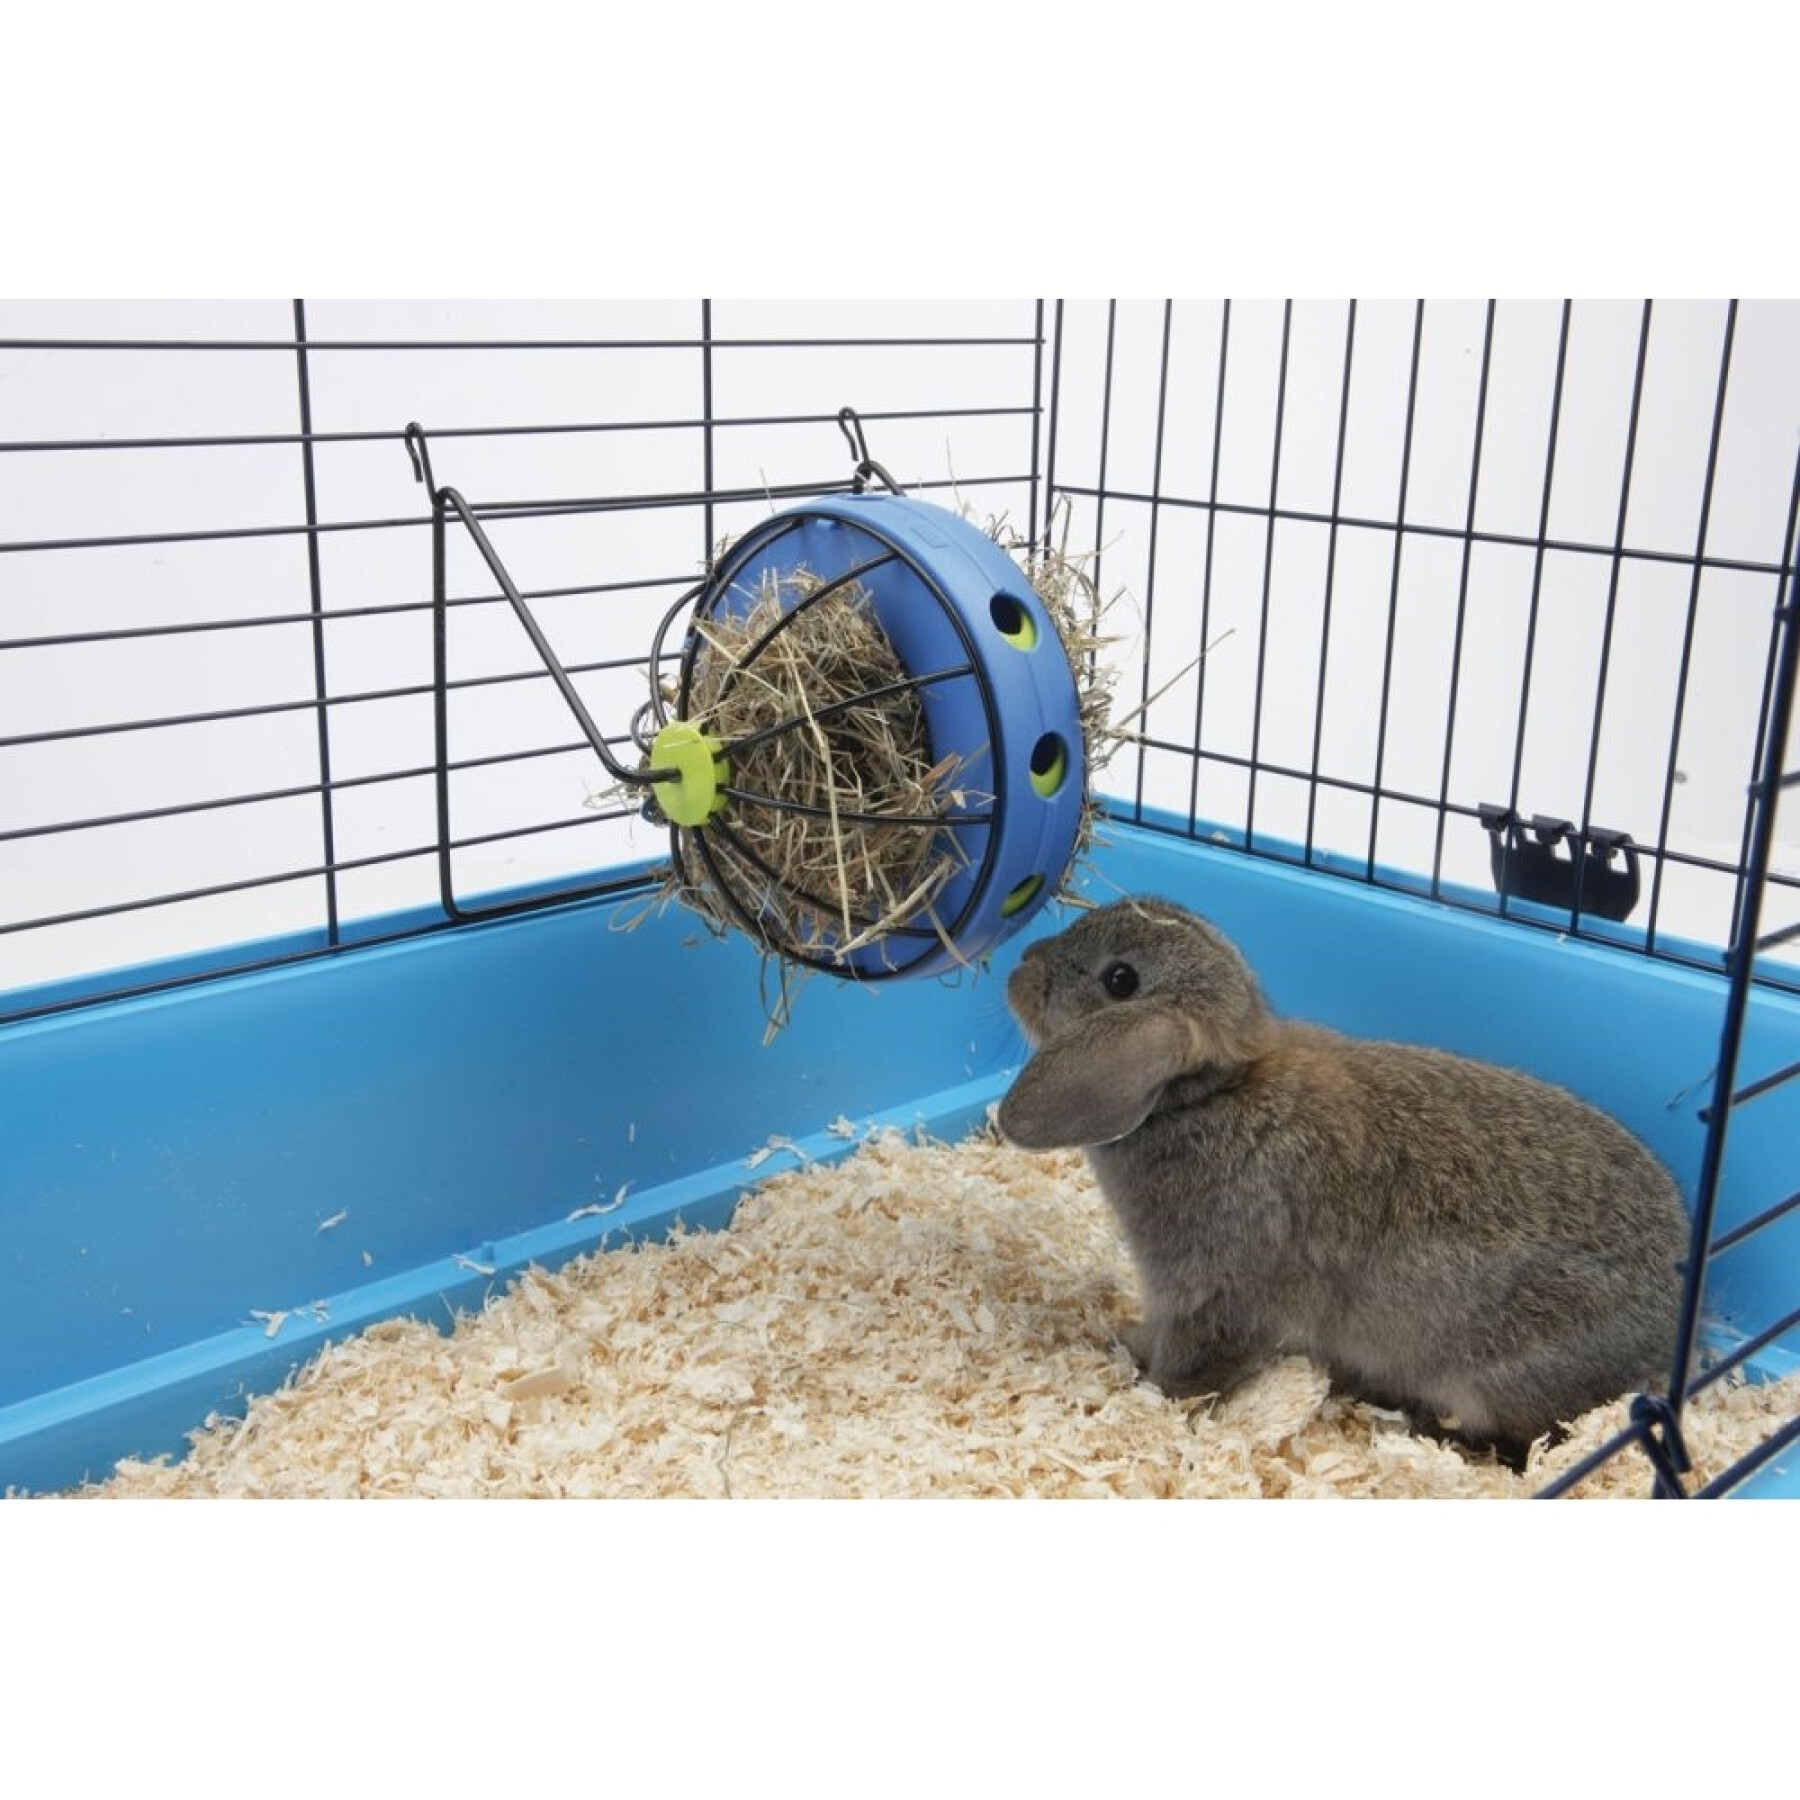 Hay ball for rodents Nobby Pet Bunny Toy